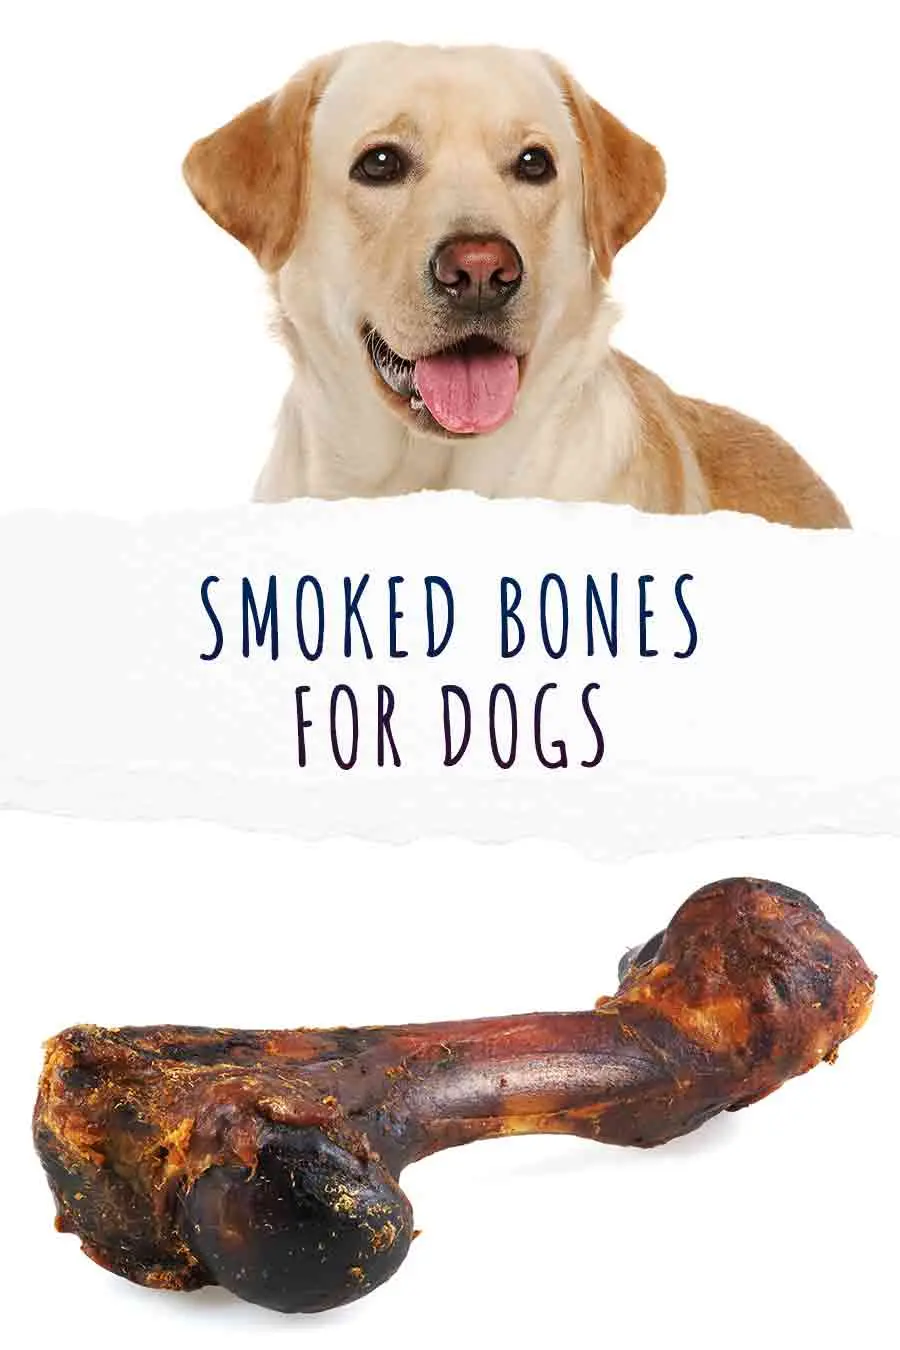 can dogs eat smoked bones - Are smoked bones from the pet store safe